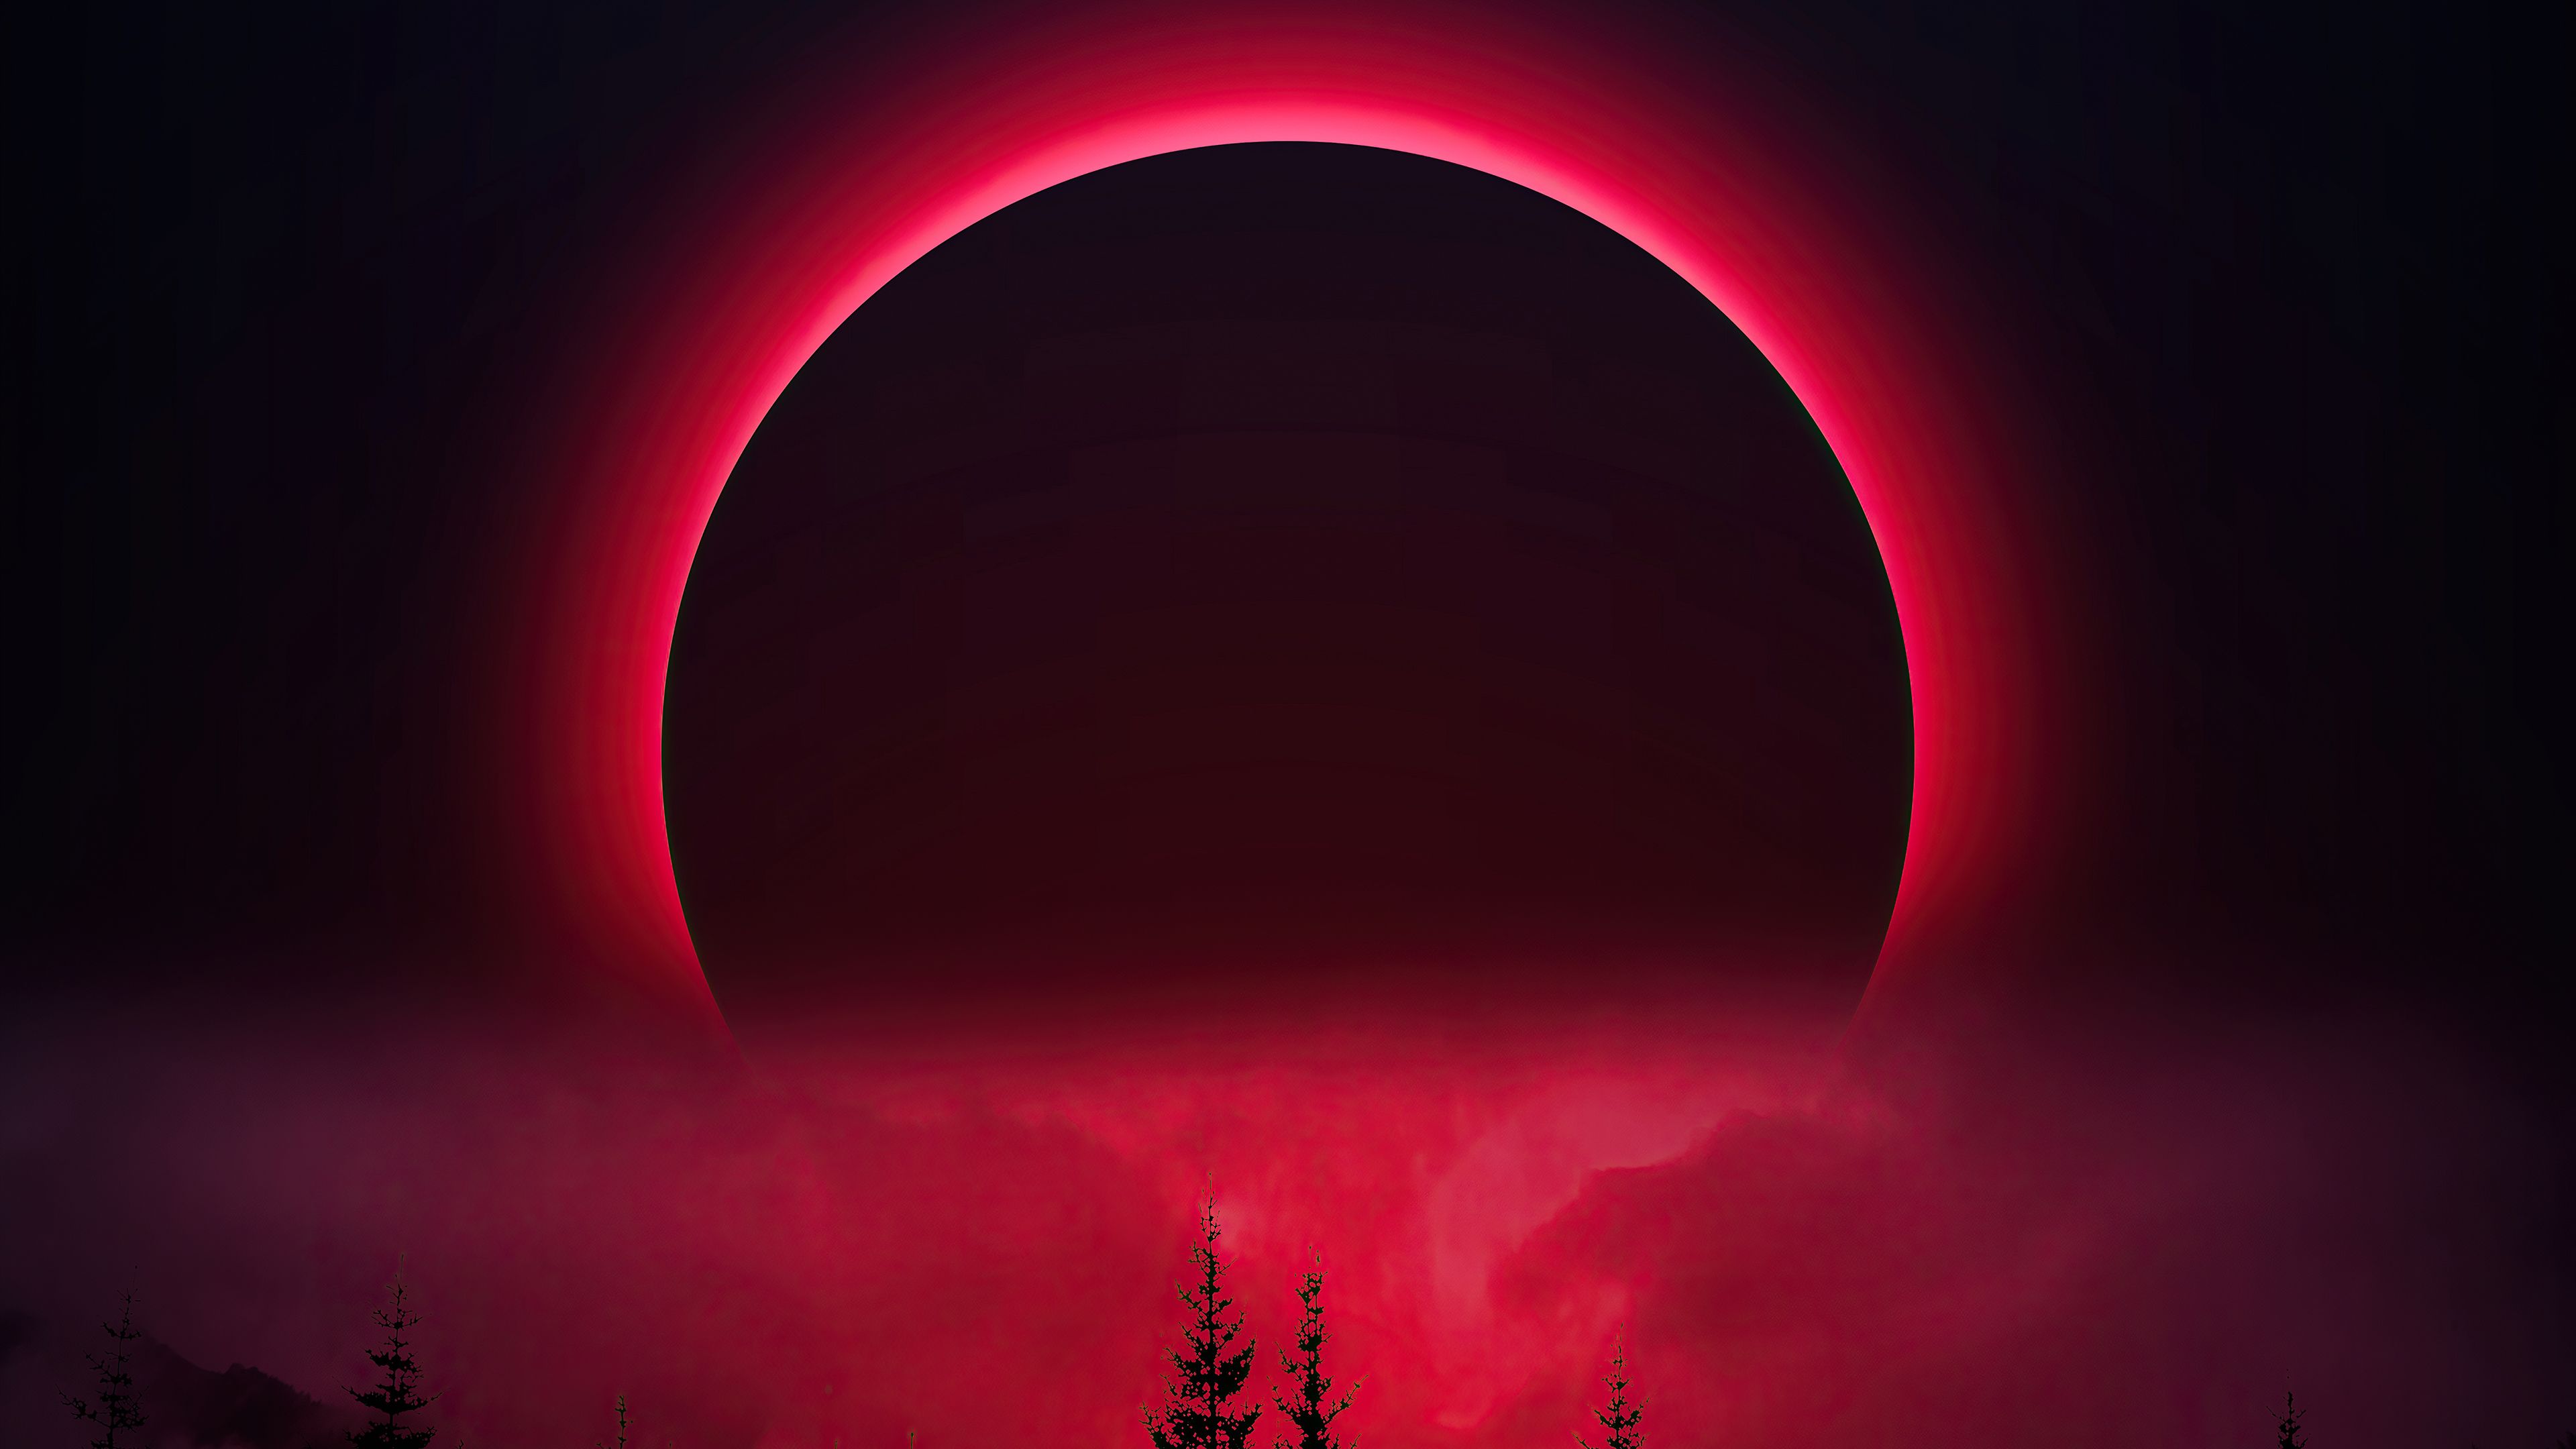 Red Moon, HD Artist, 4k Wallpaper, Image, Background, Photo and Picture